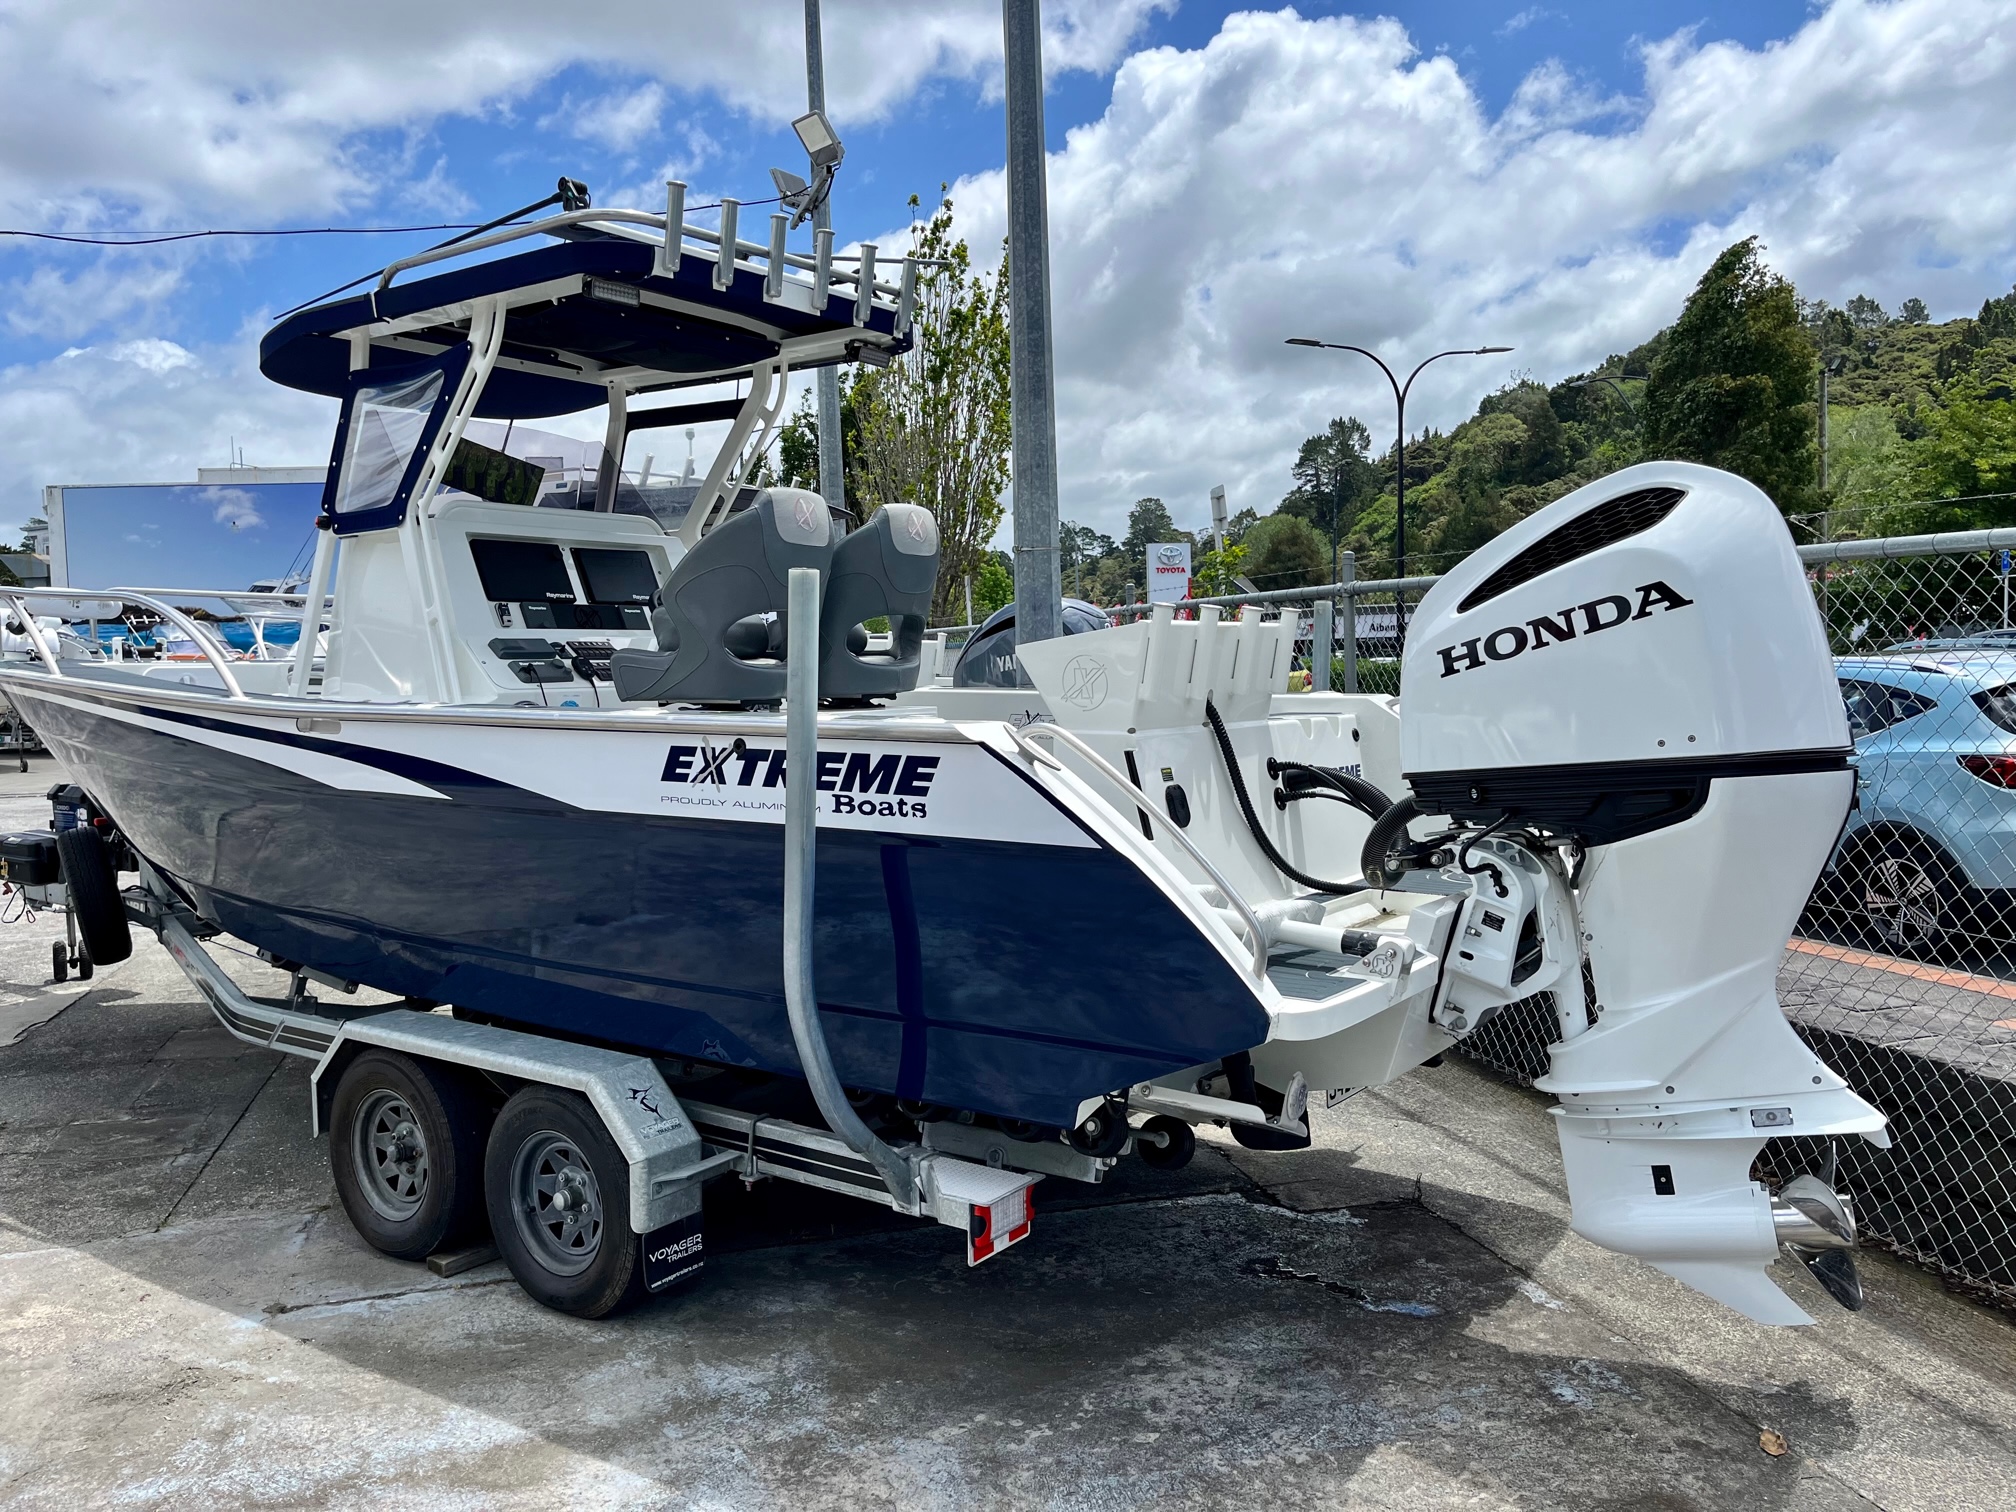 NZ Boat for sale Extreme / 745 Centre Console / 2019